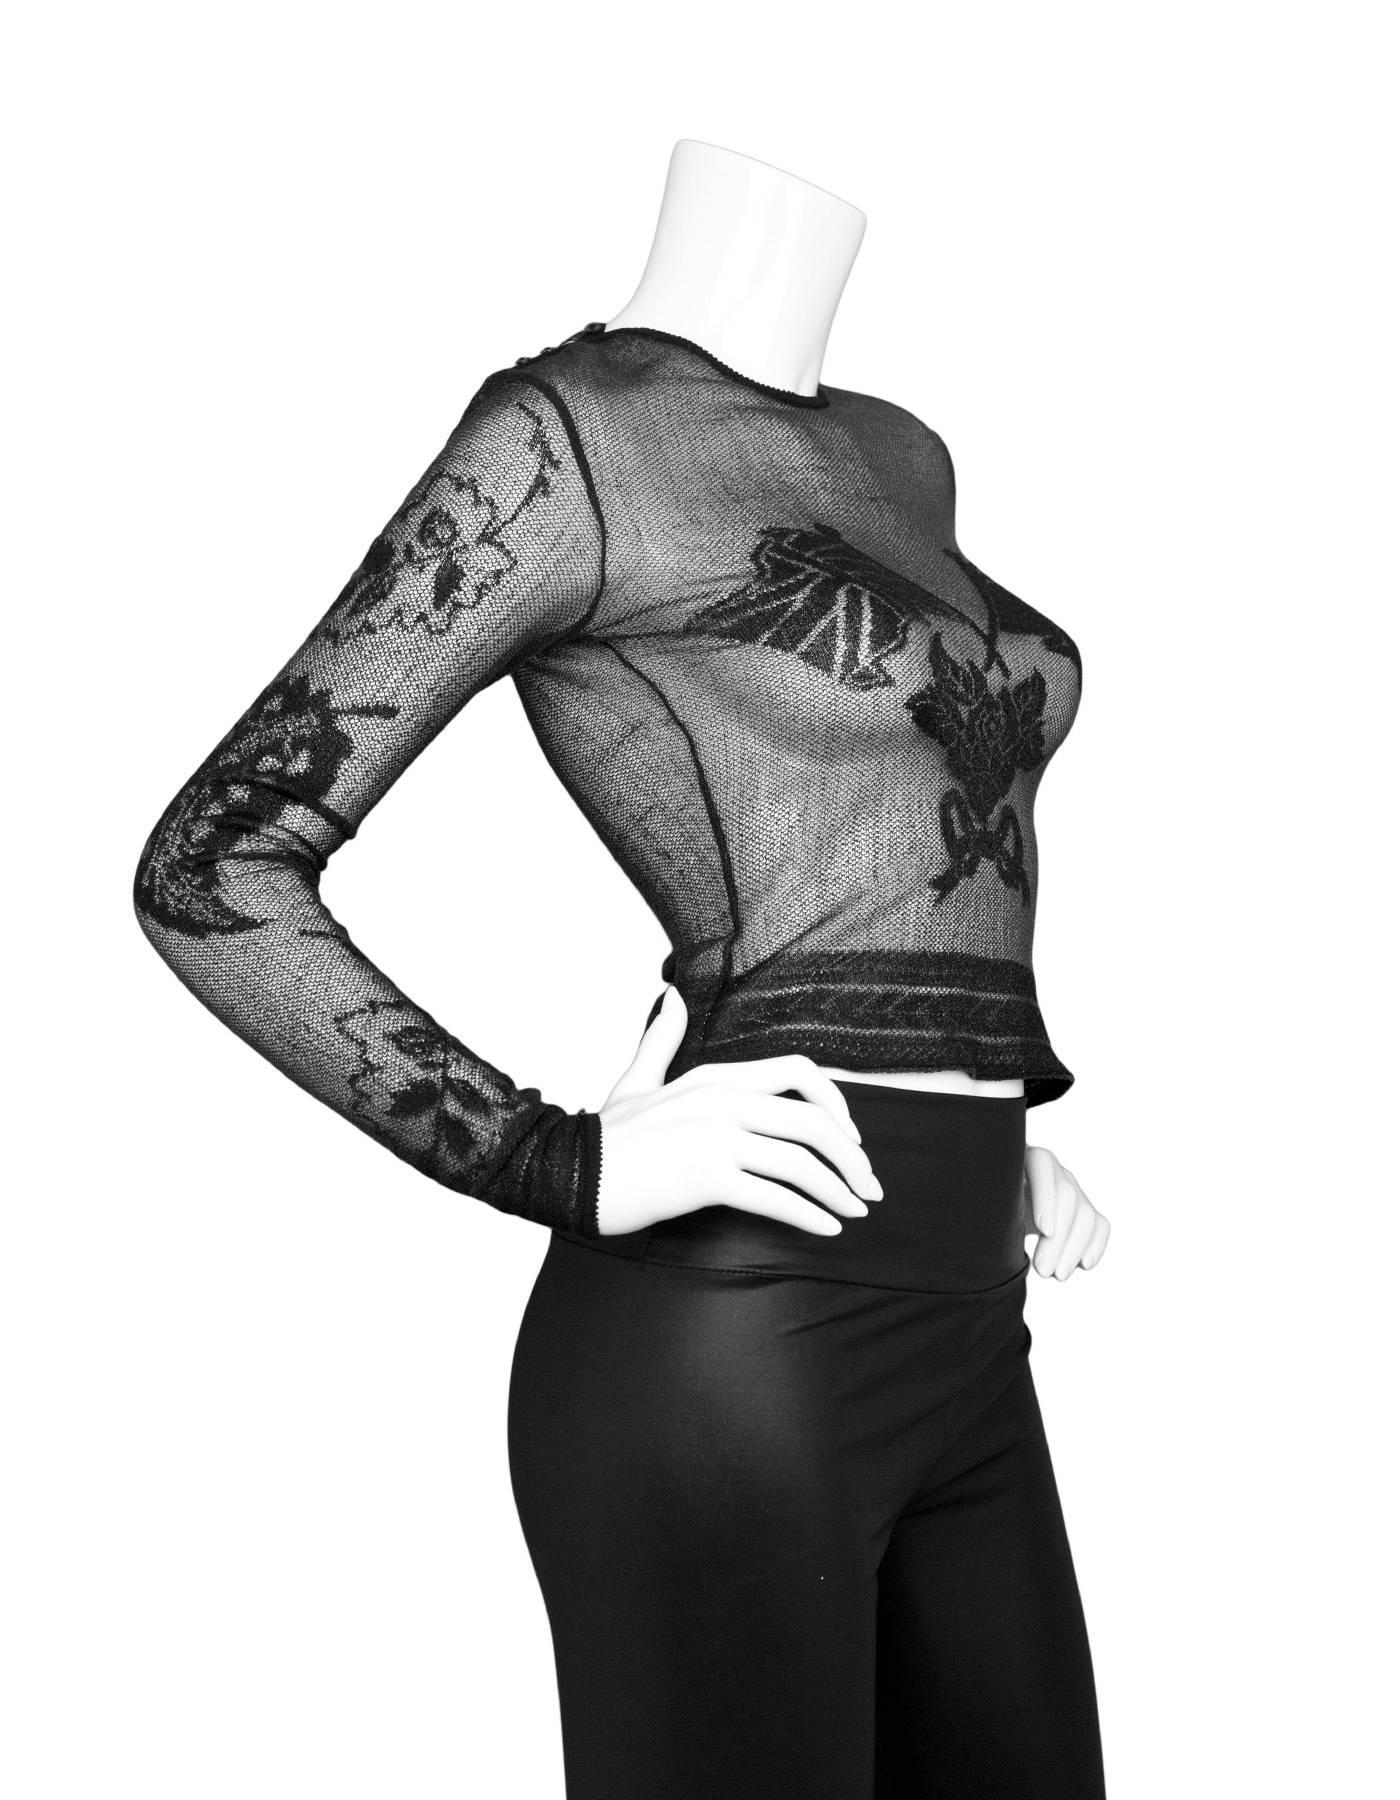 John Galliano  Black Sheer Long Sleeve Top
Features floral print and metallic threading throughout

Color: Black
Composition: Not given- believed to be a silk-blend
Lining: None
Closure/Opening: Pull over 
Exterior Pockets: None
Interior Pockets: